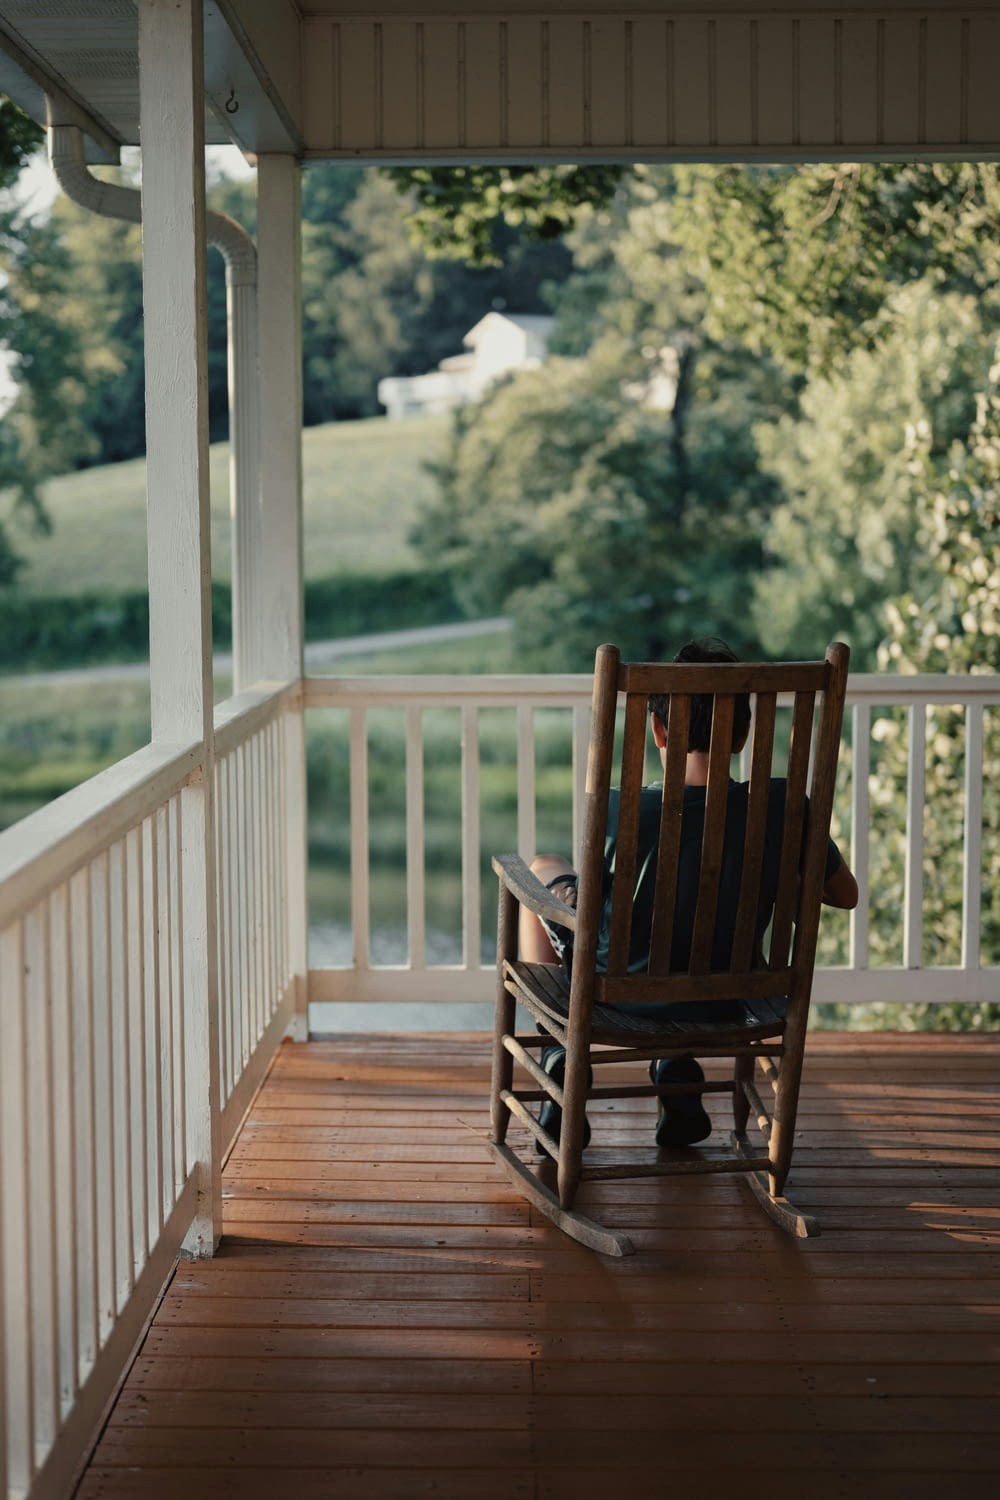 a person sitting on a rocking chair on a porch